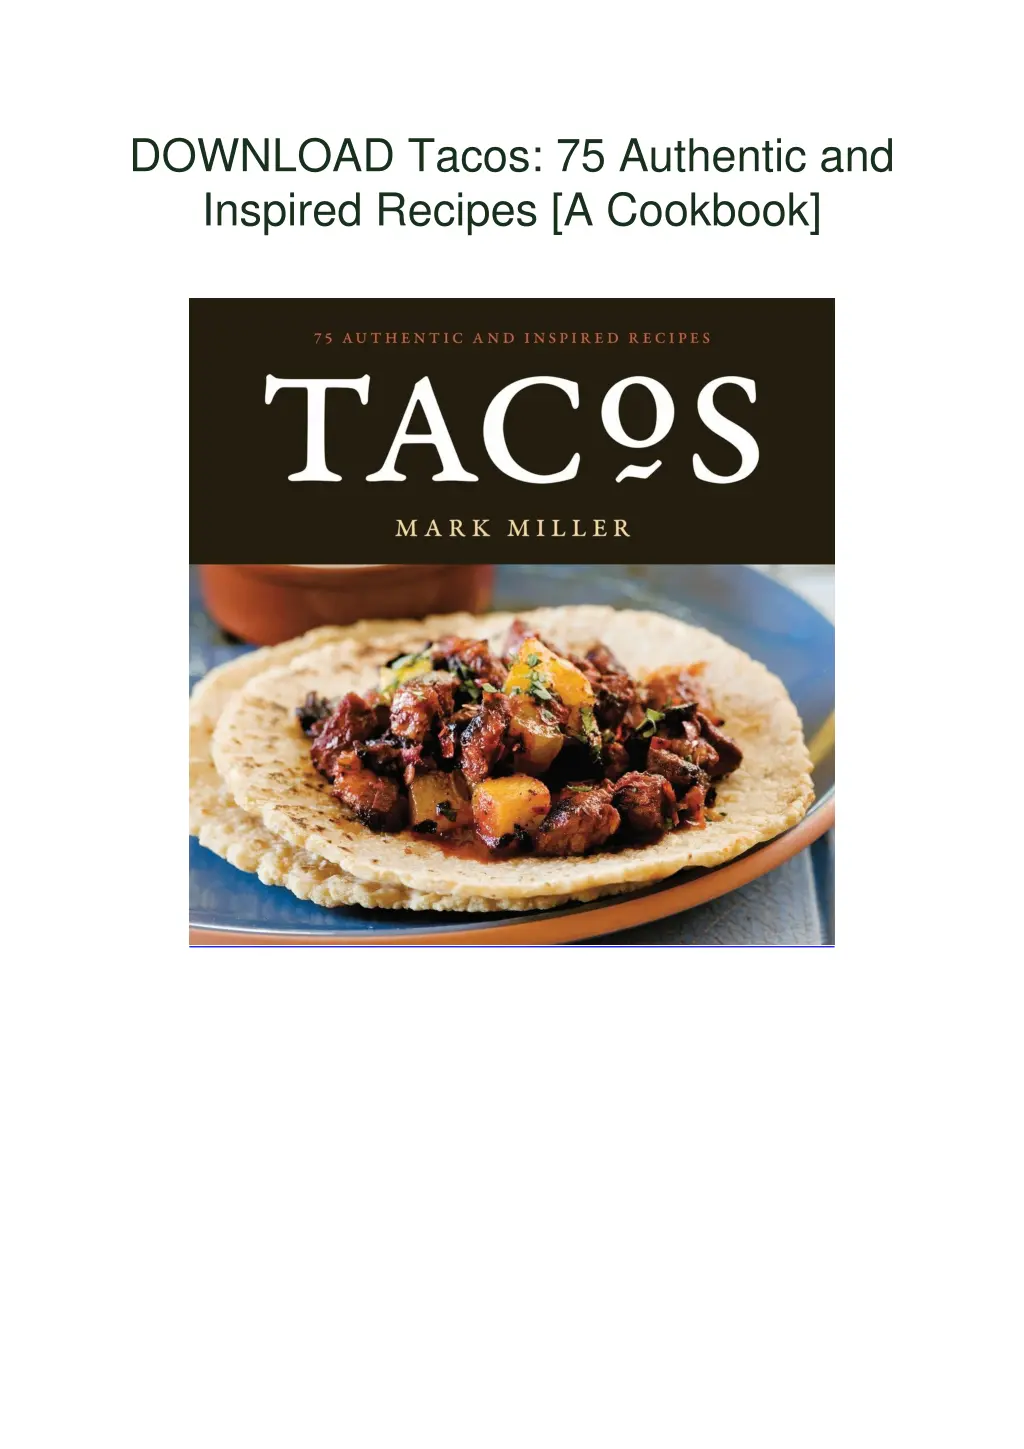 download tacos 75 authentic and inspired recipes